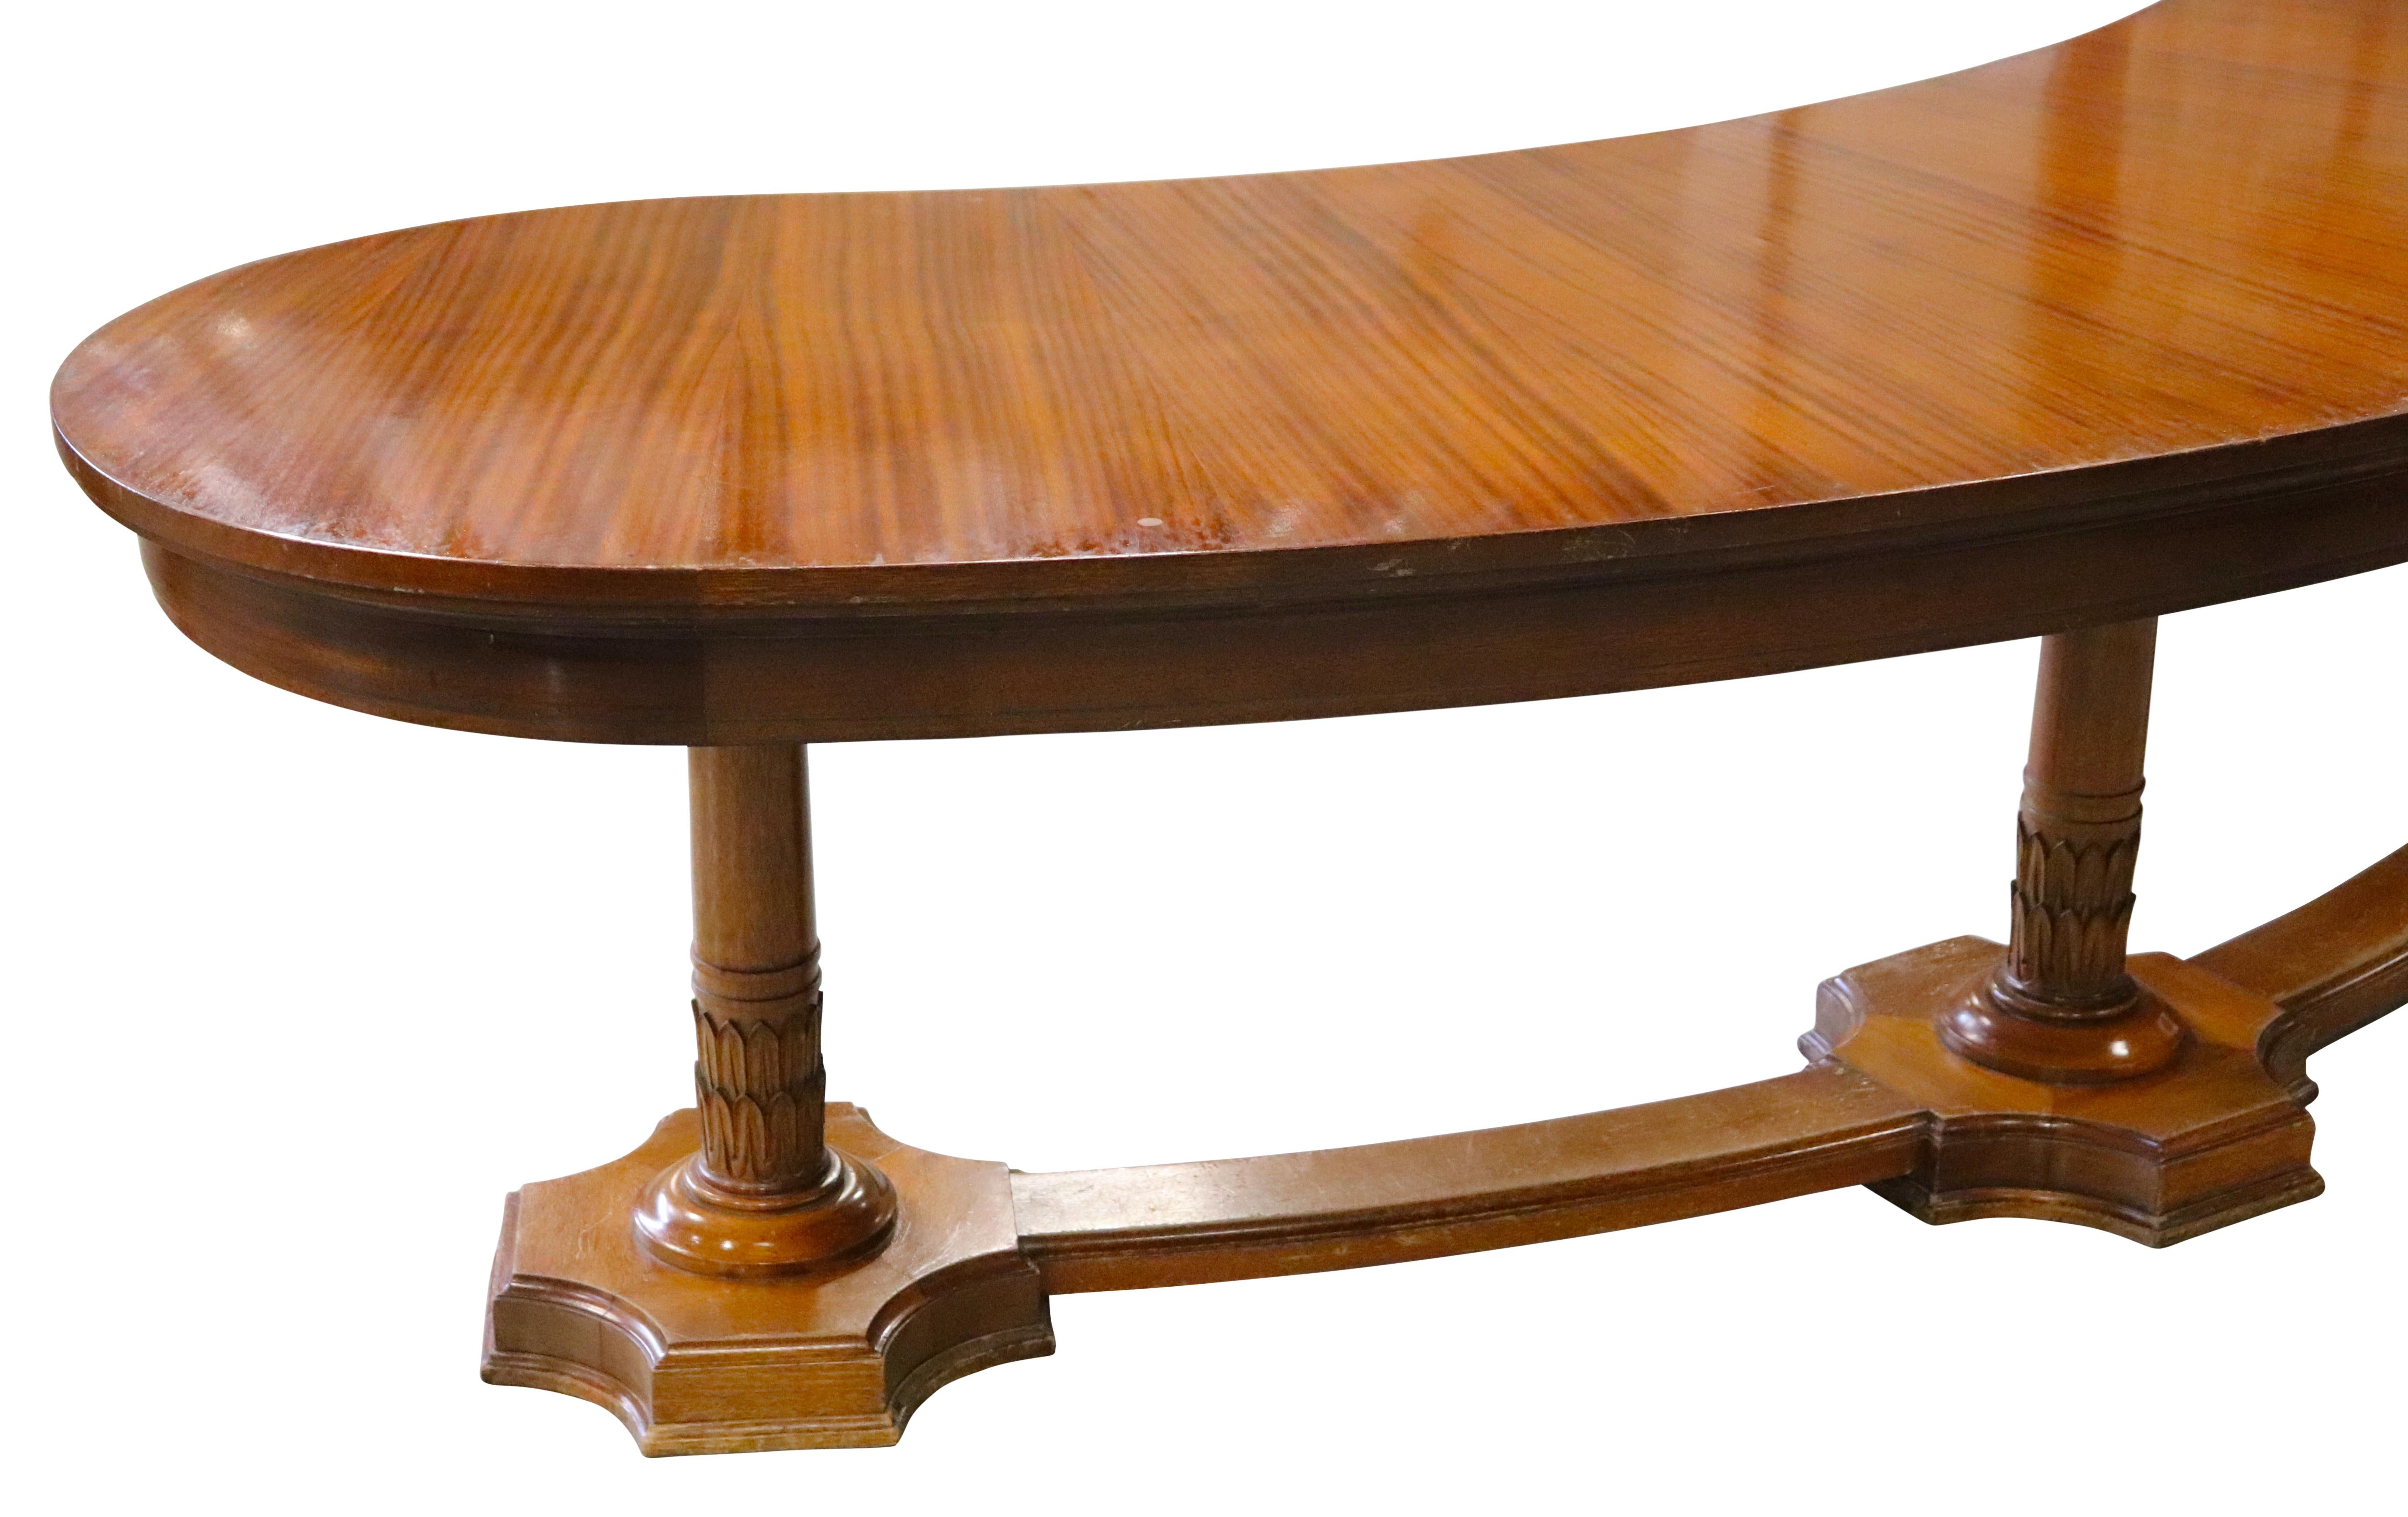 20th Century Belgian Mahogany Conference Table, Boardroom Table, circa 1920 For Sale